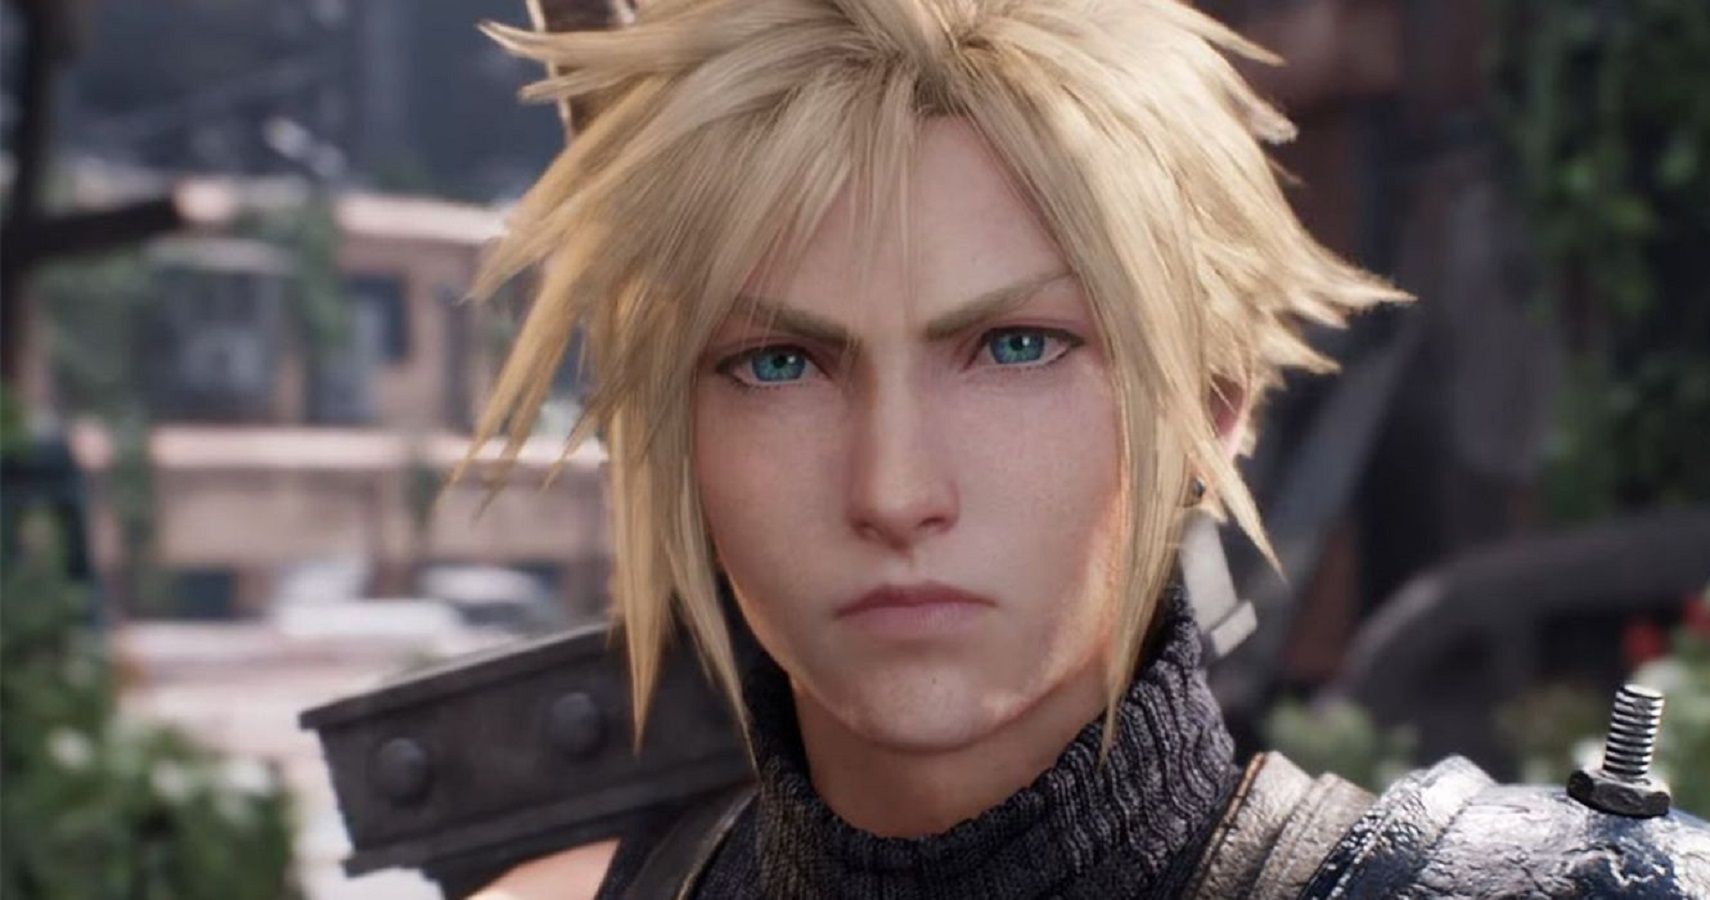 Cloud Strife's Softness Is His Greatest Strength